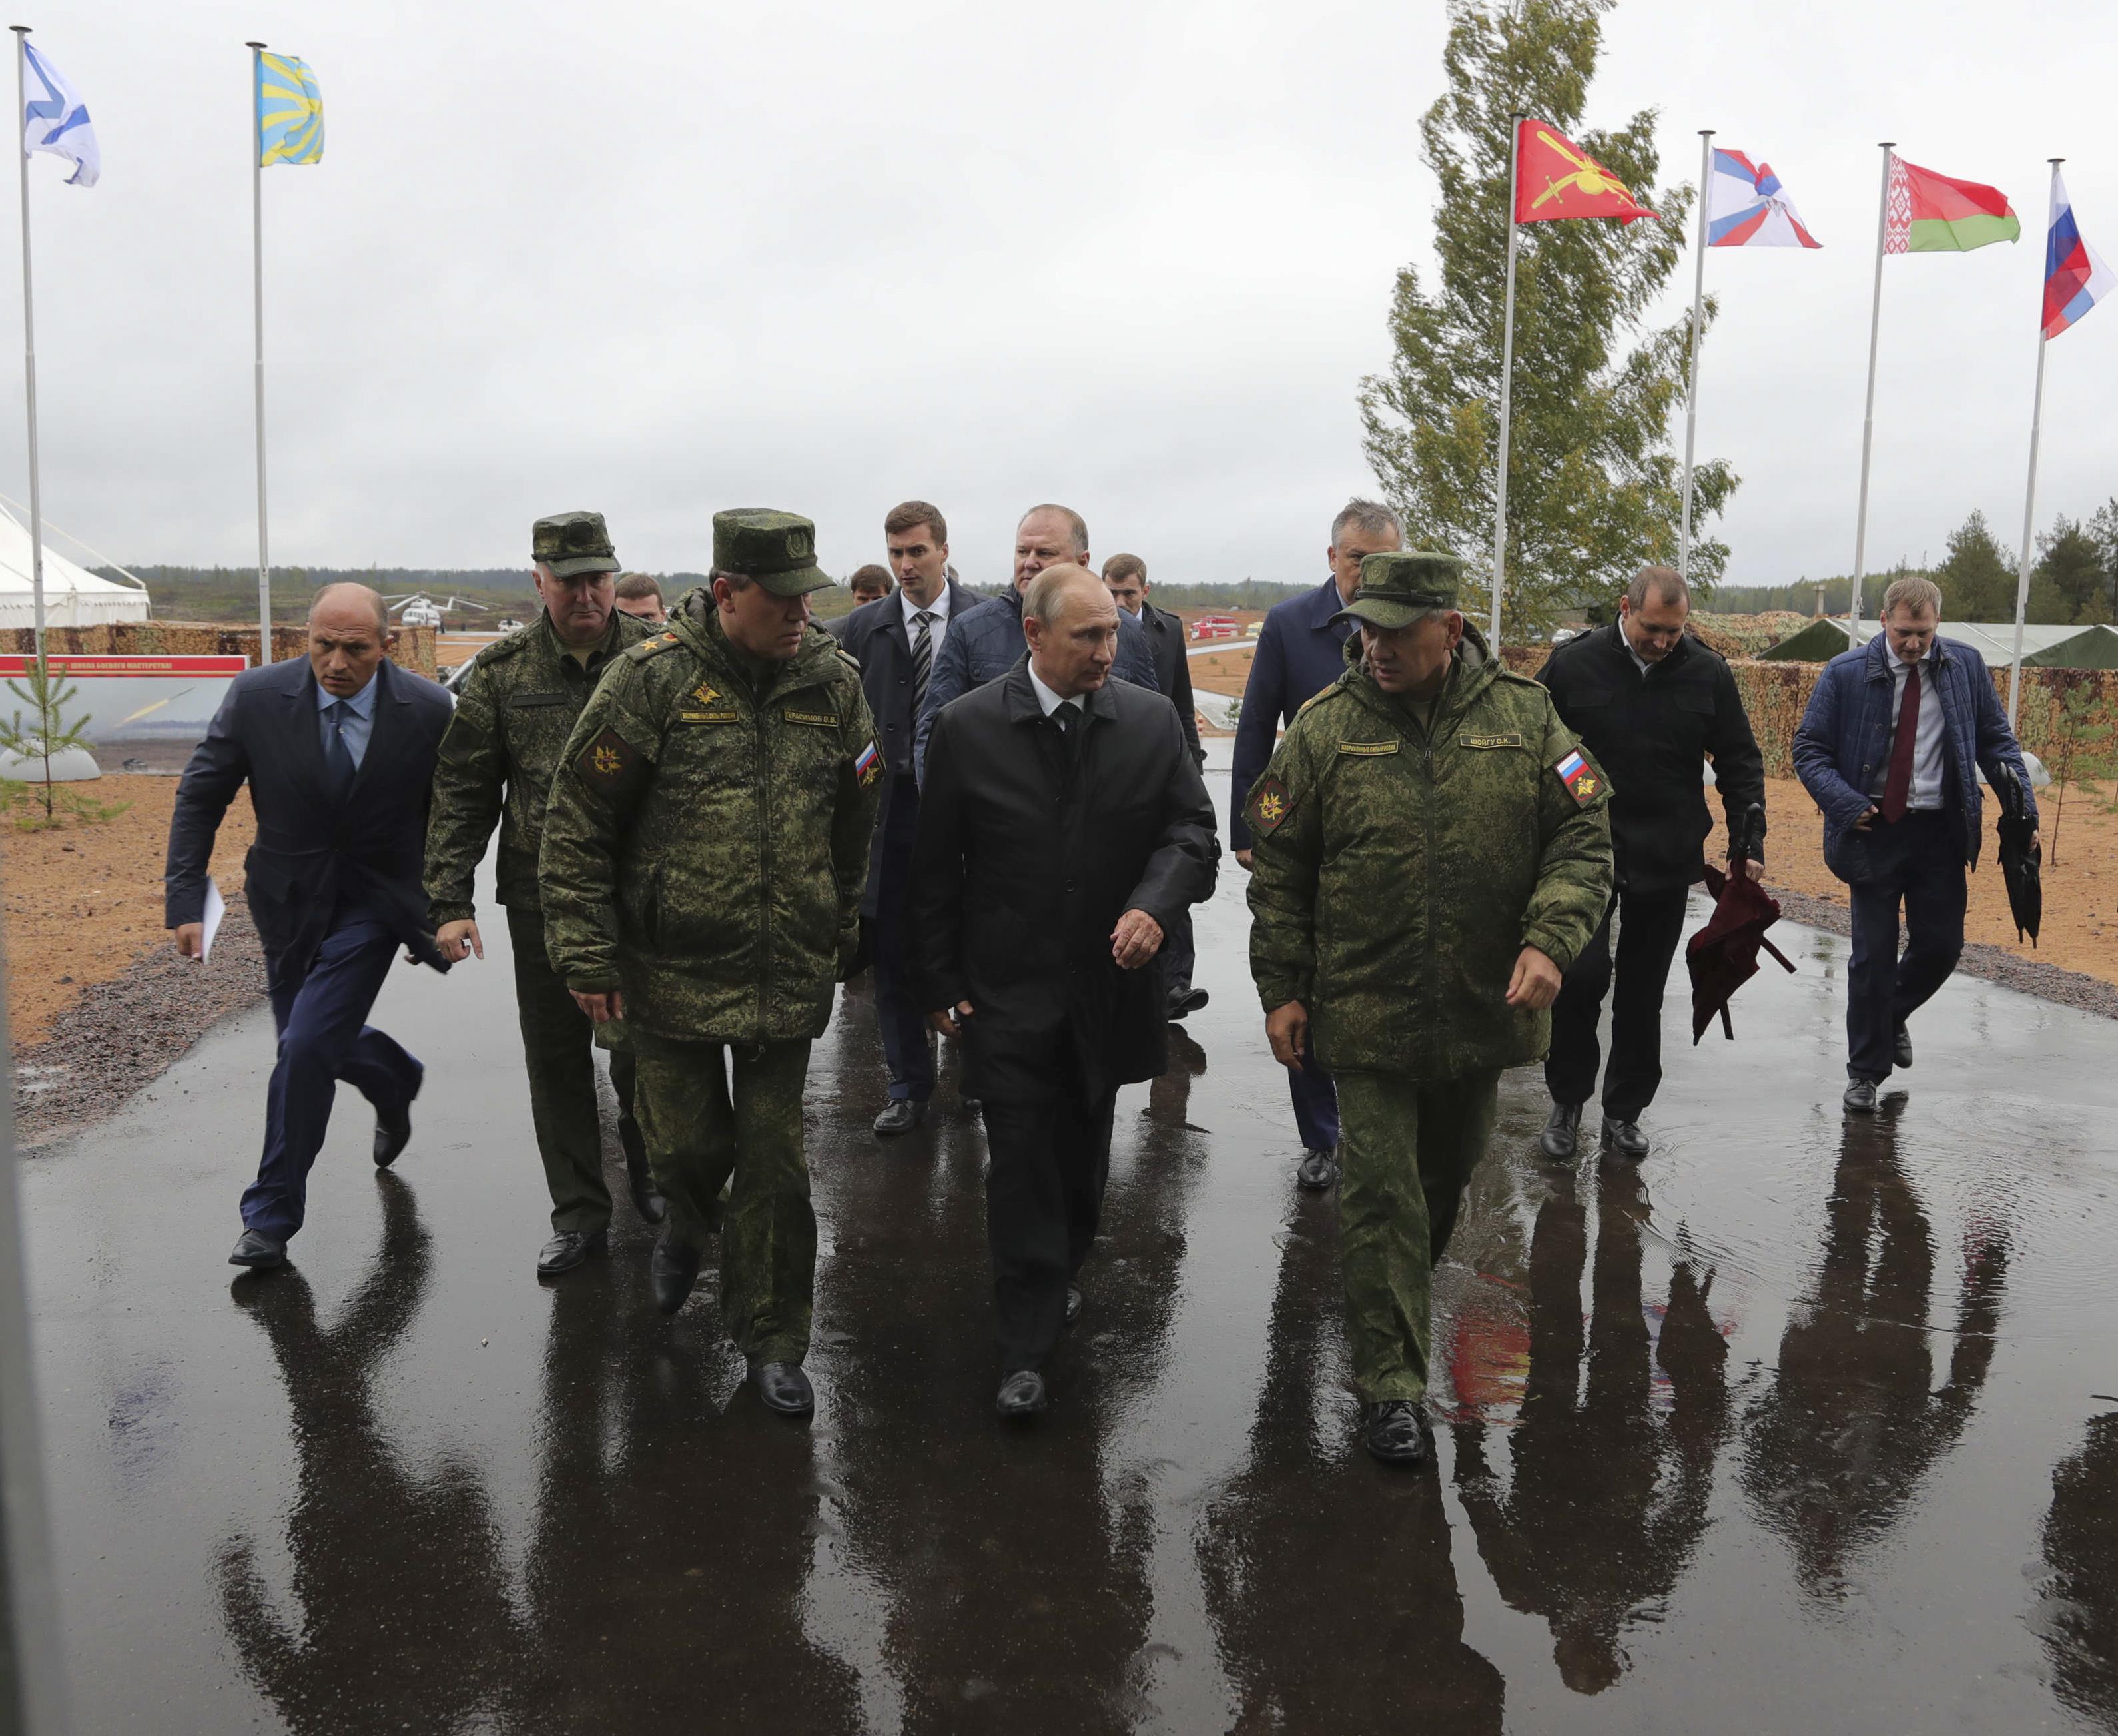 (R-L, front) Russian Defence Minister Sergei Shoigu, President Vladimir Putin and Chief of the General Staff of Russian Armed Forces Valery Gerasimov visit a military training ground to watch the Zapad-2017 war games, held by Russian and Belarussian servicemen, in the Leningrad region, Russia September 18, 2017. Sputnik/Mikhail Klimentyev/Kremlin via REUTERS